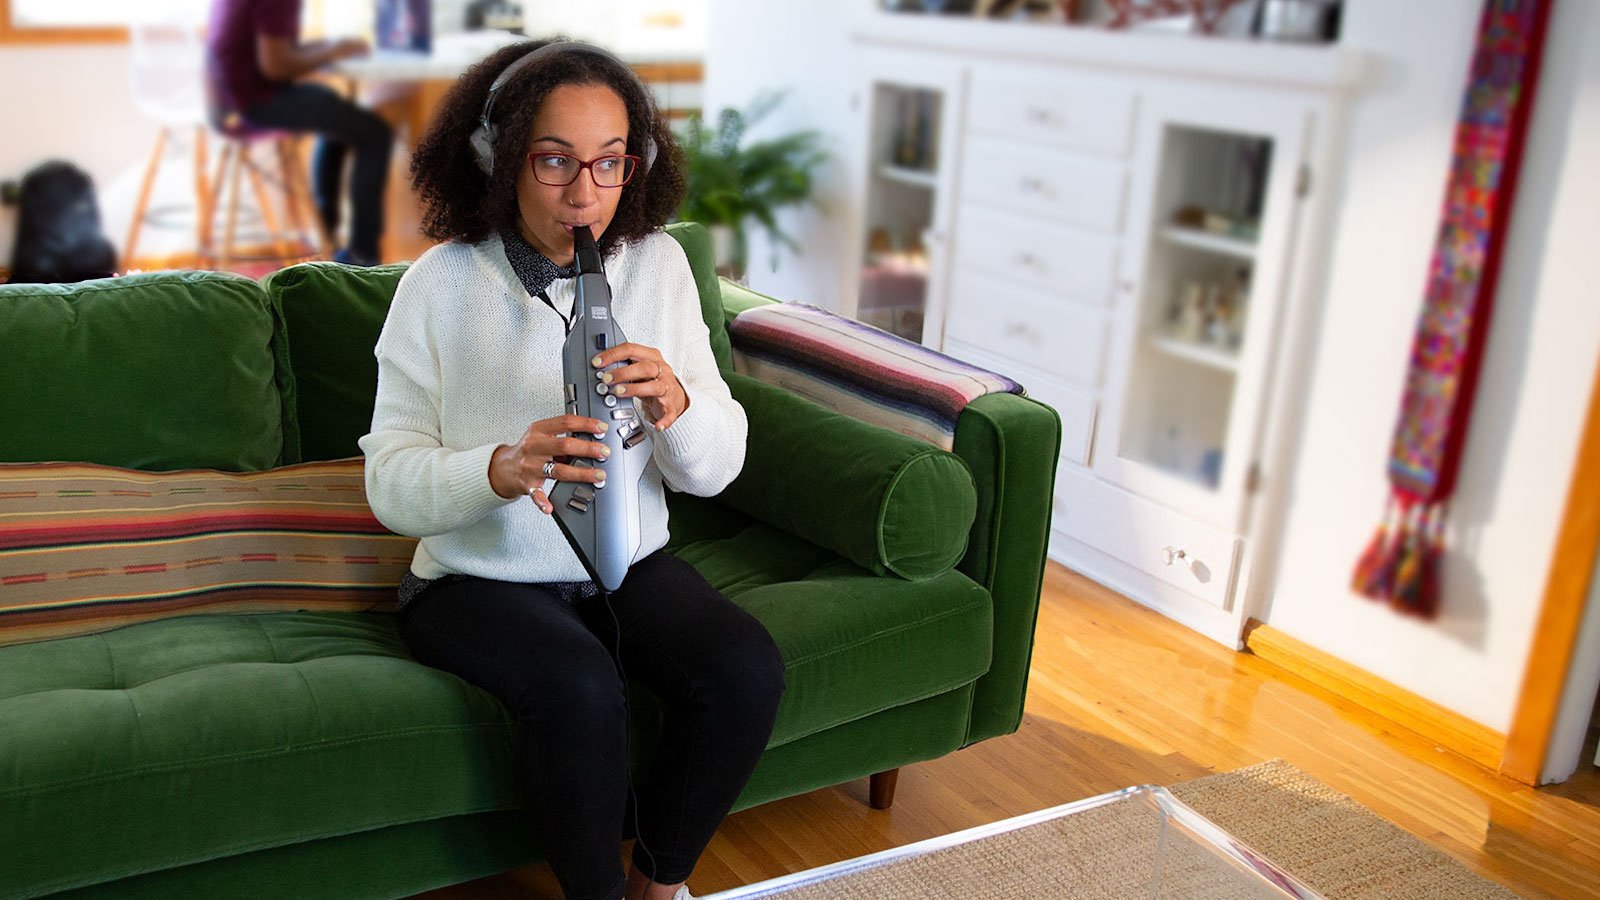 Roland Aerophone GO digital wind instrument lets you play without disturbing others